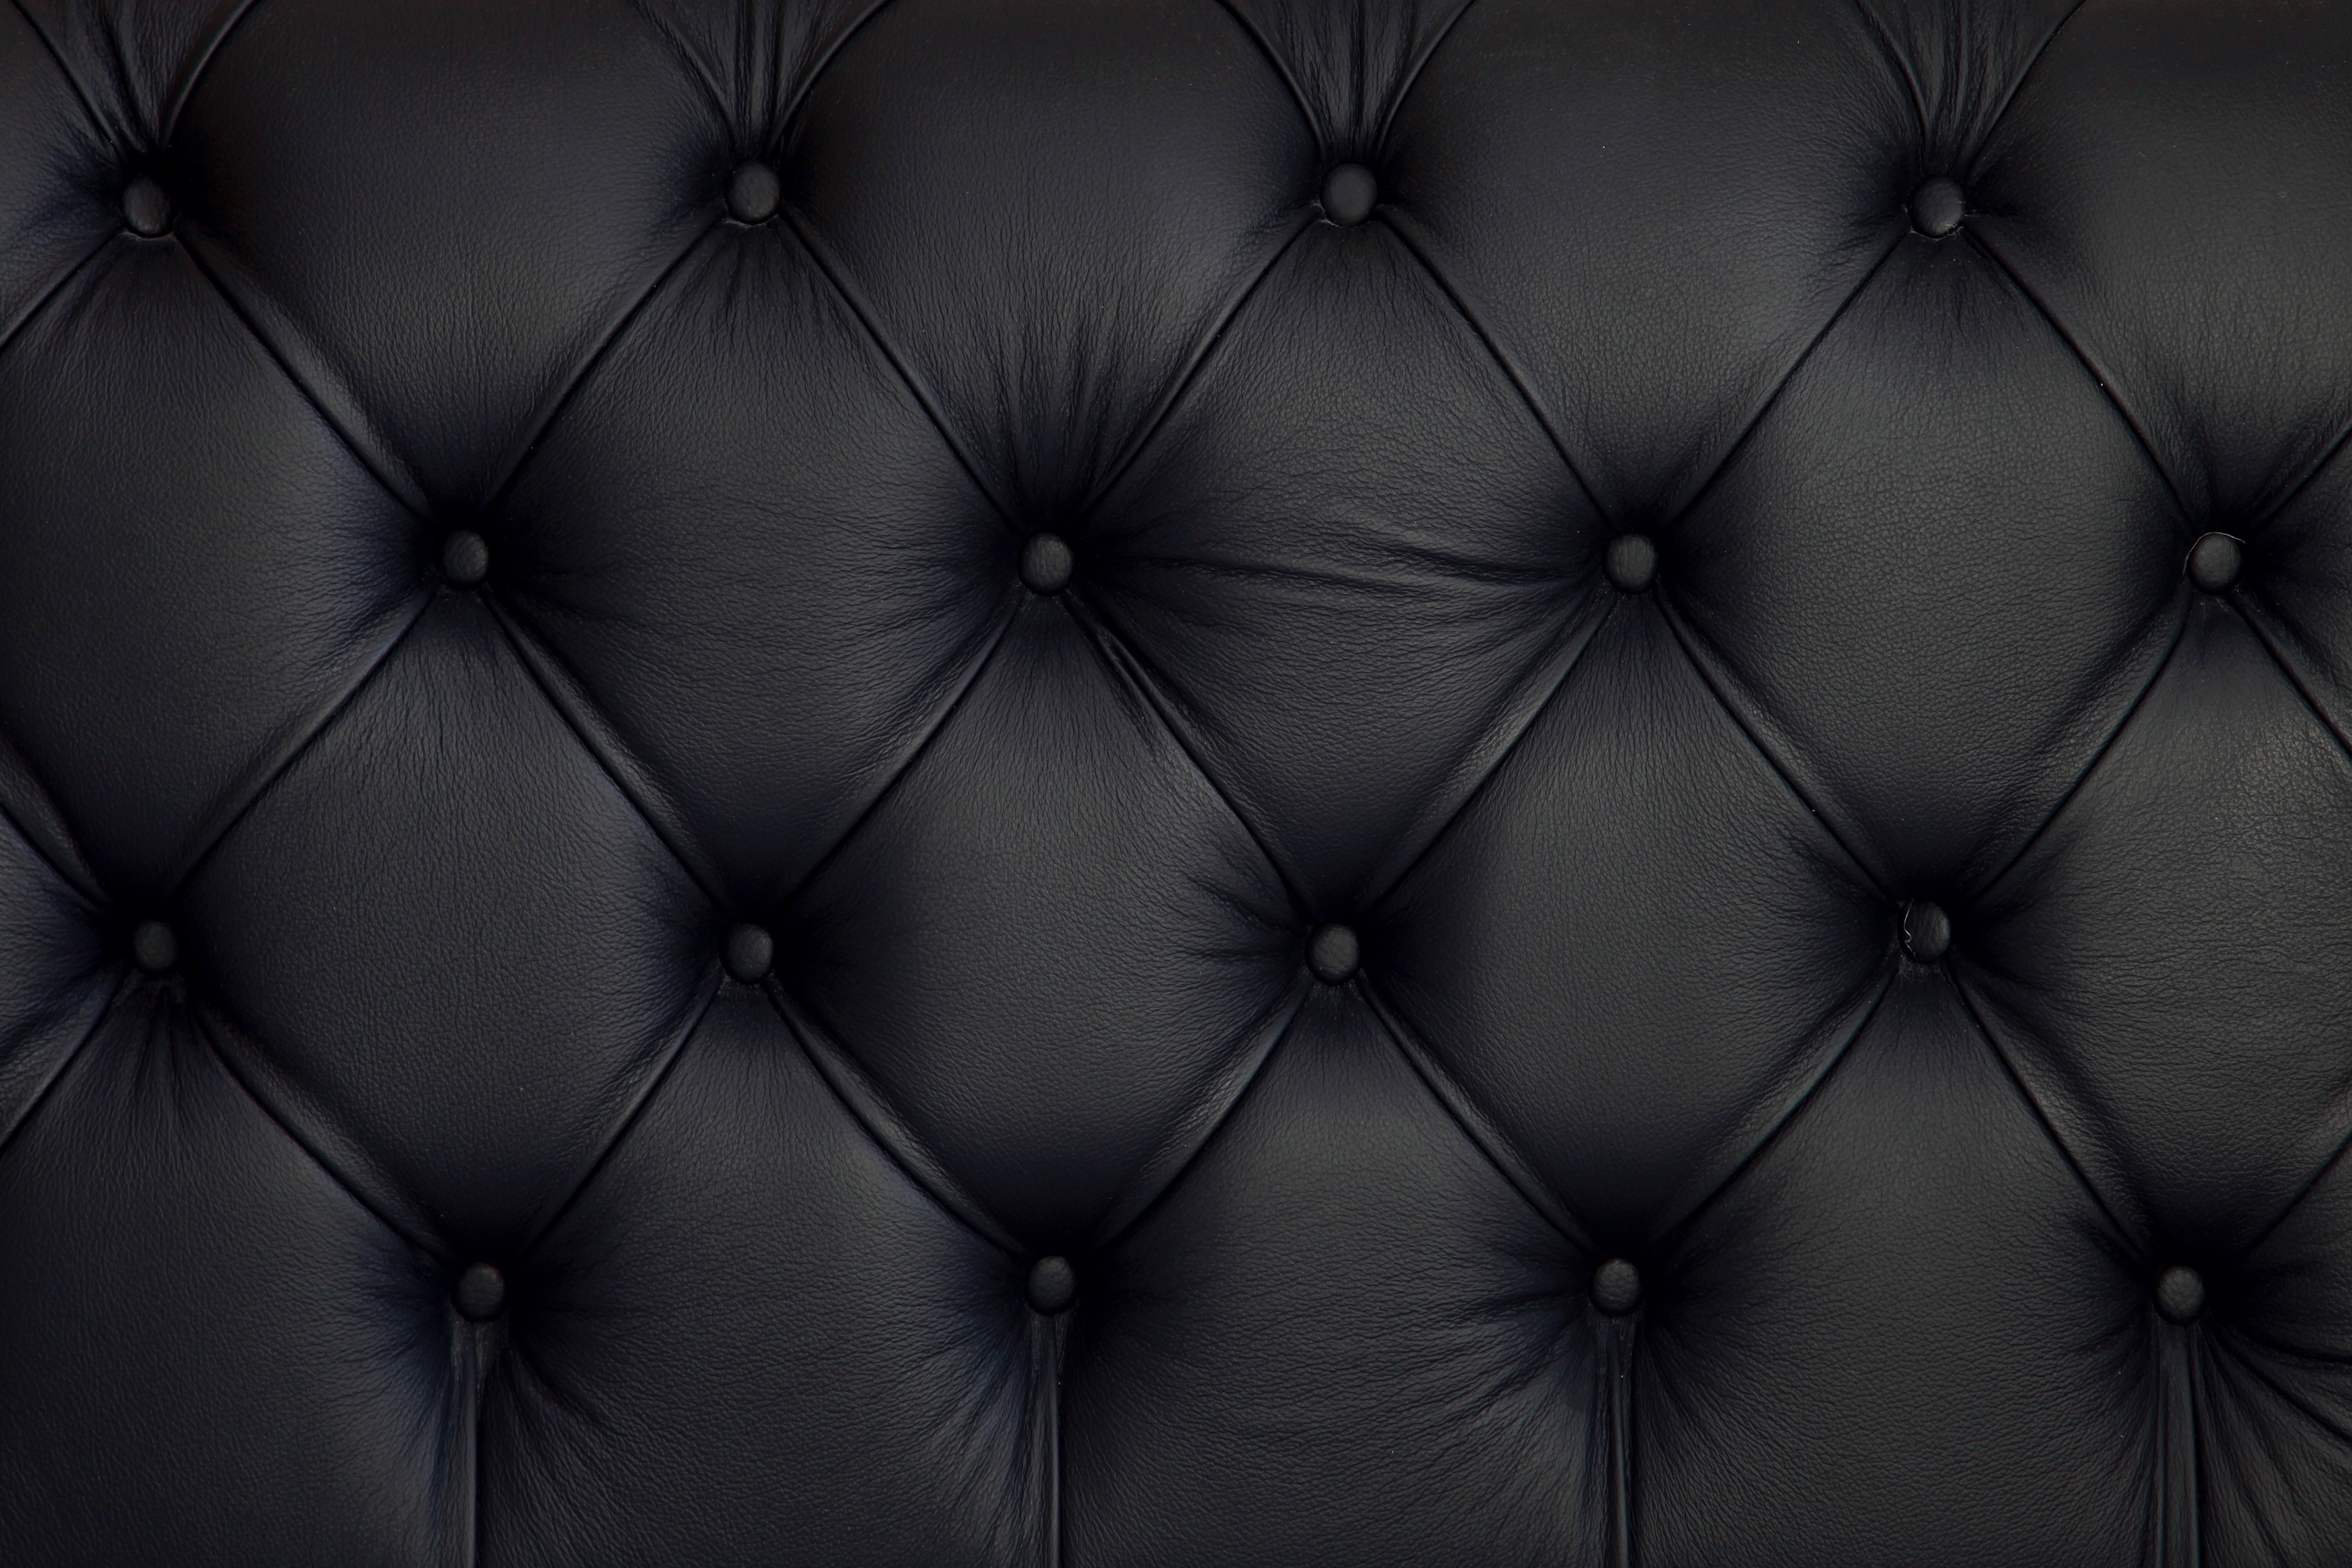 quilted black leather textile, texture, upholstery, skin, sofa